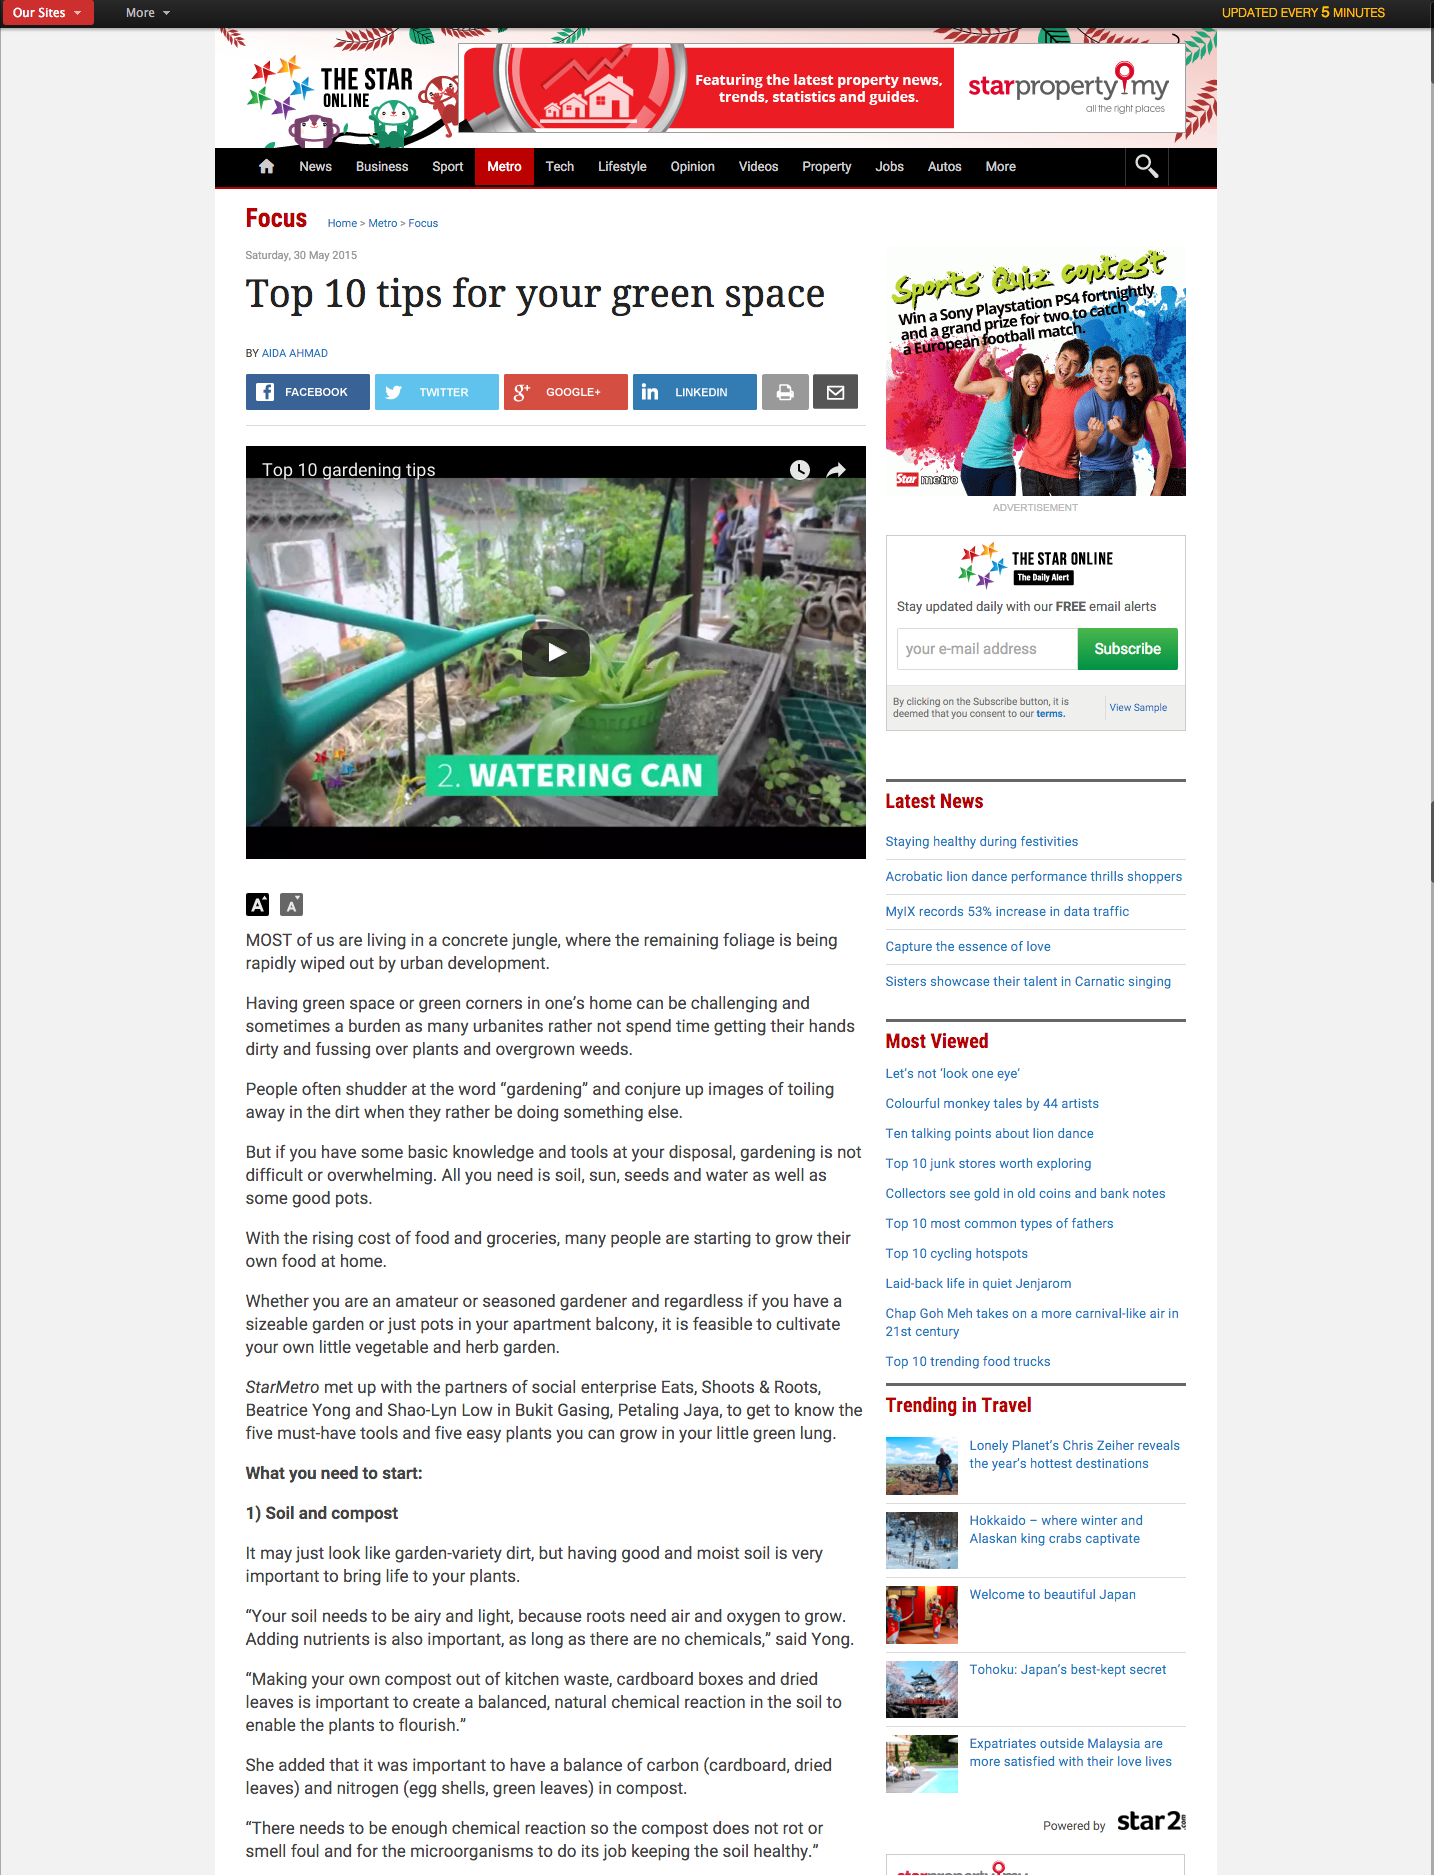 The Star - Top 10 tips for your green space - Focus | The Star Online1